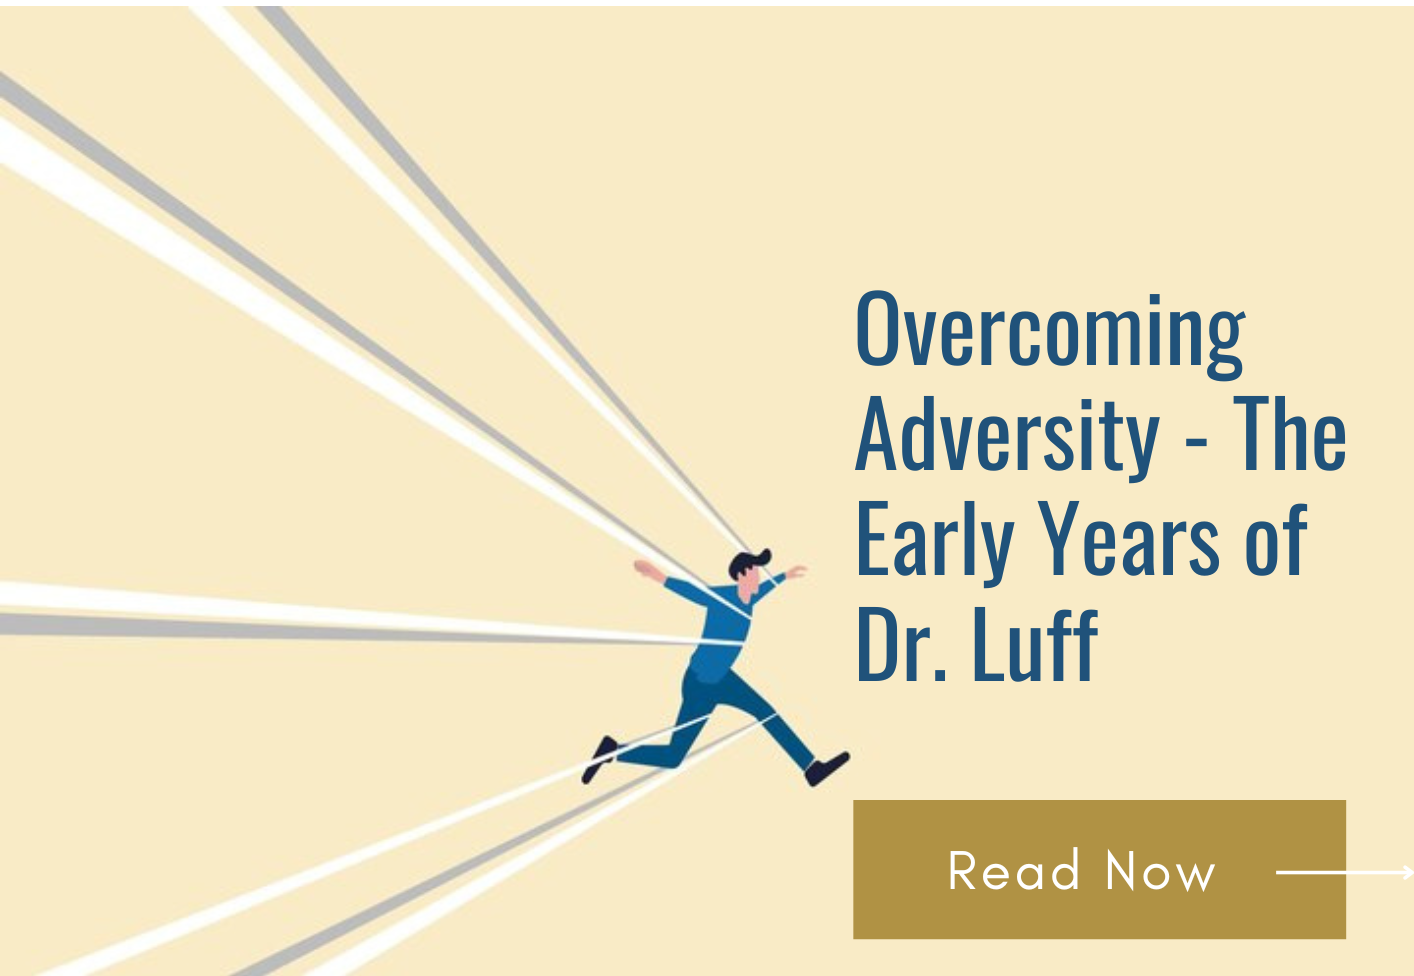 Overcoming Adversity - The Early Years of Dr. Luff